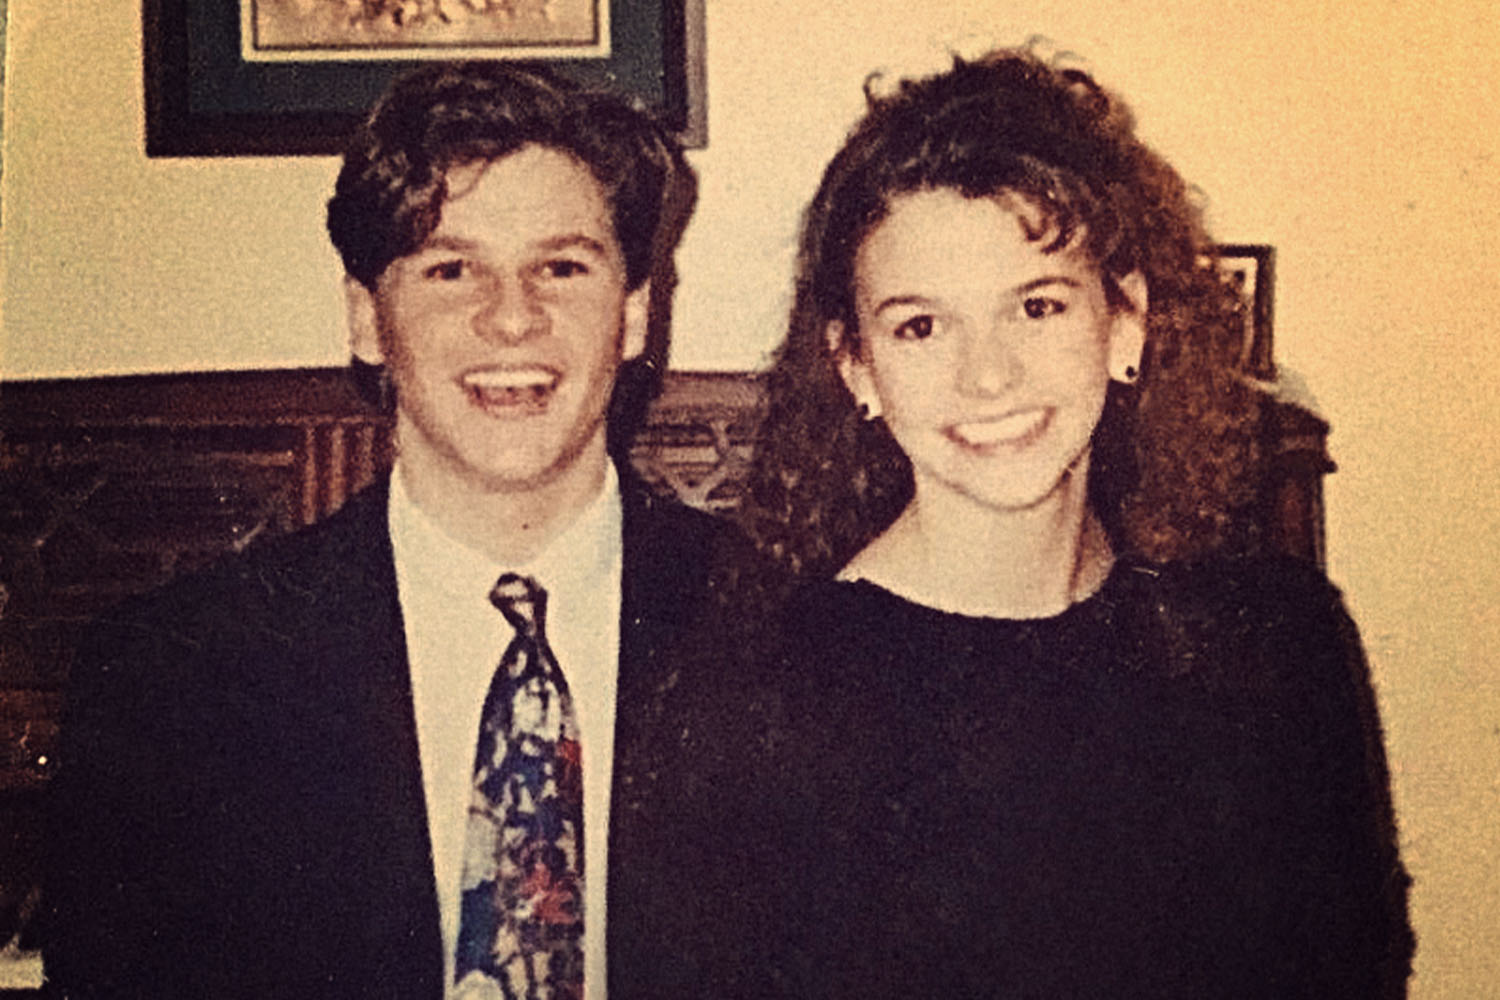 David Burtka and young girl in a picture from 1990